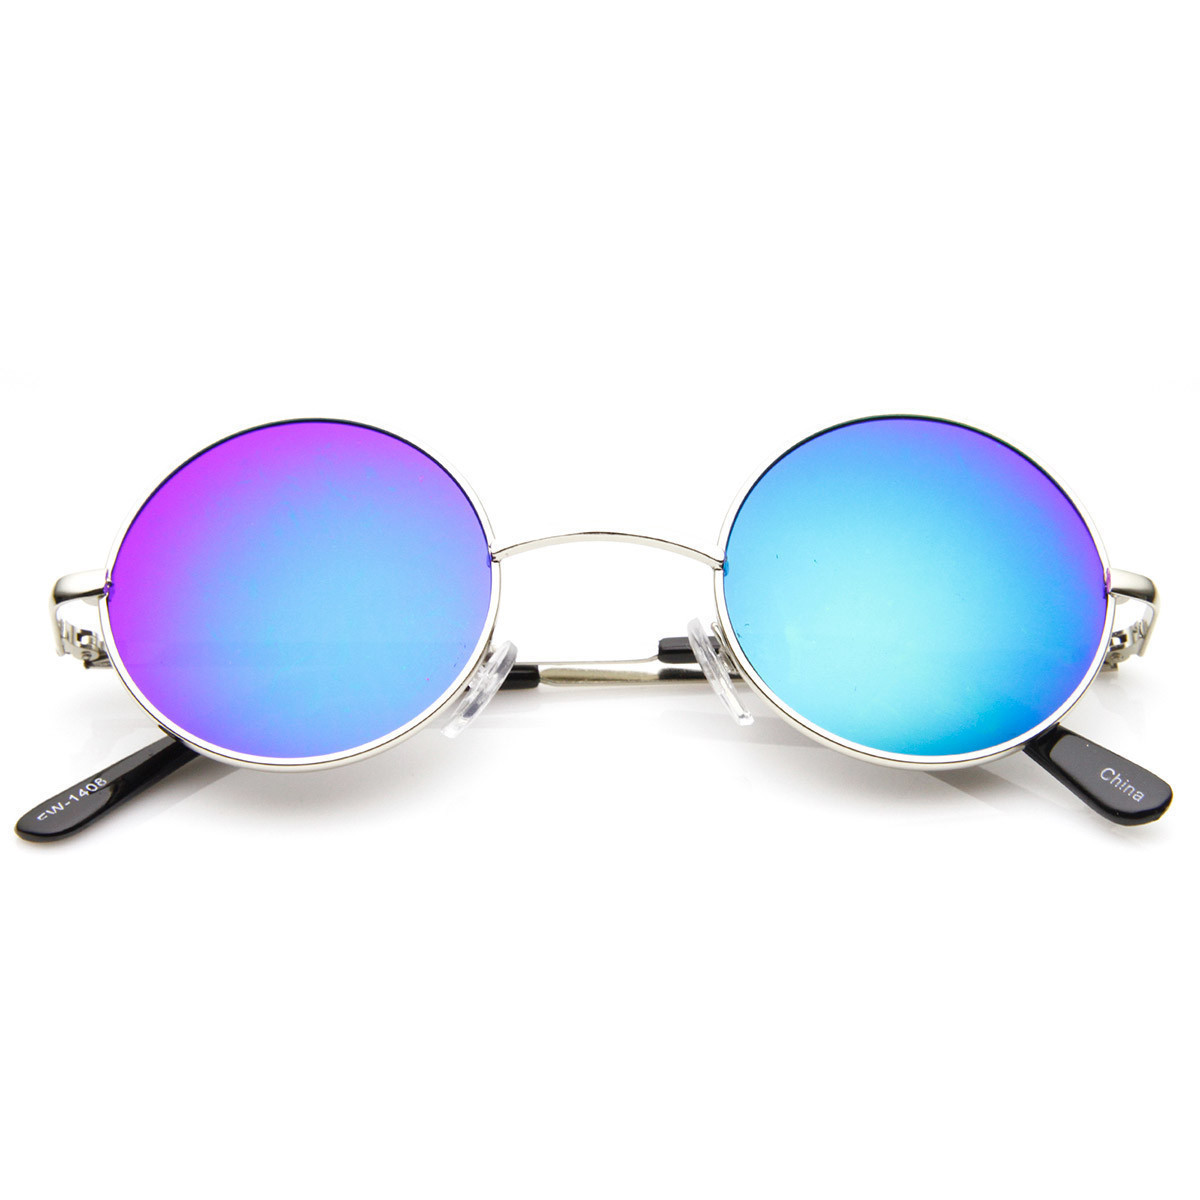 Lennon Style Round Circle Metal Sunglasses With Color Mirror Lens - 1408 - 3-Pack